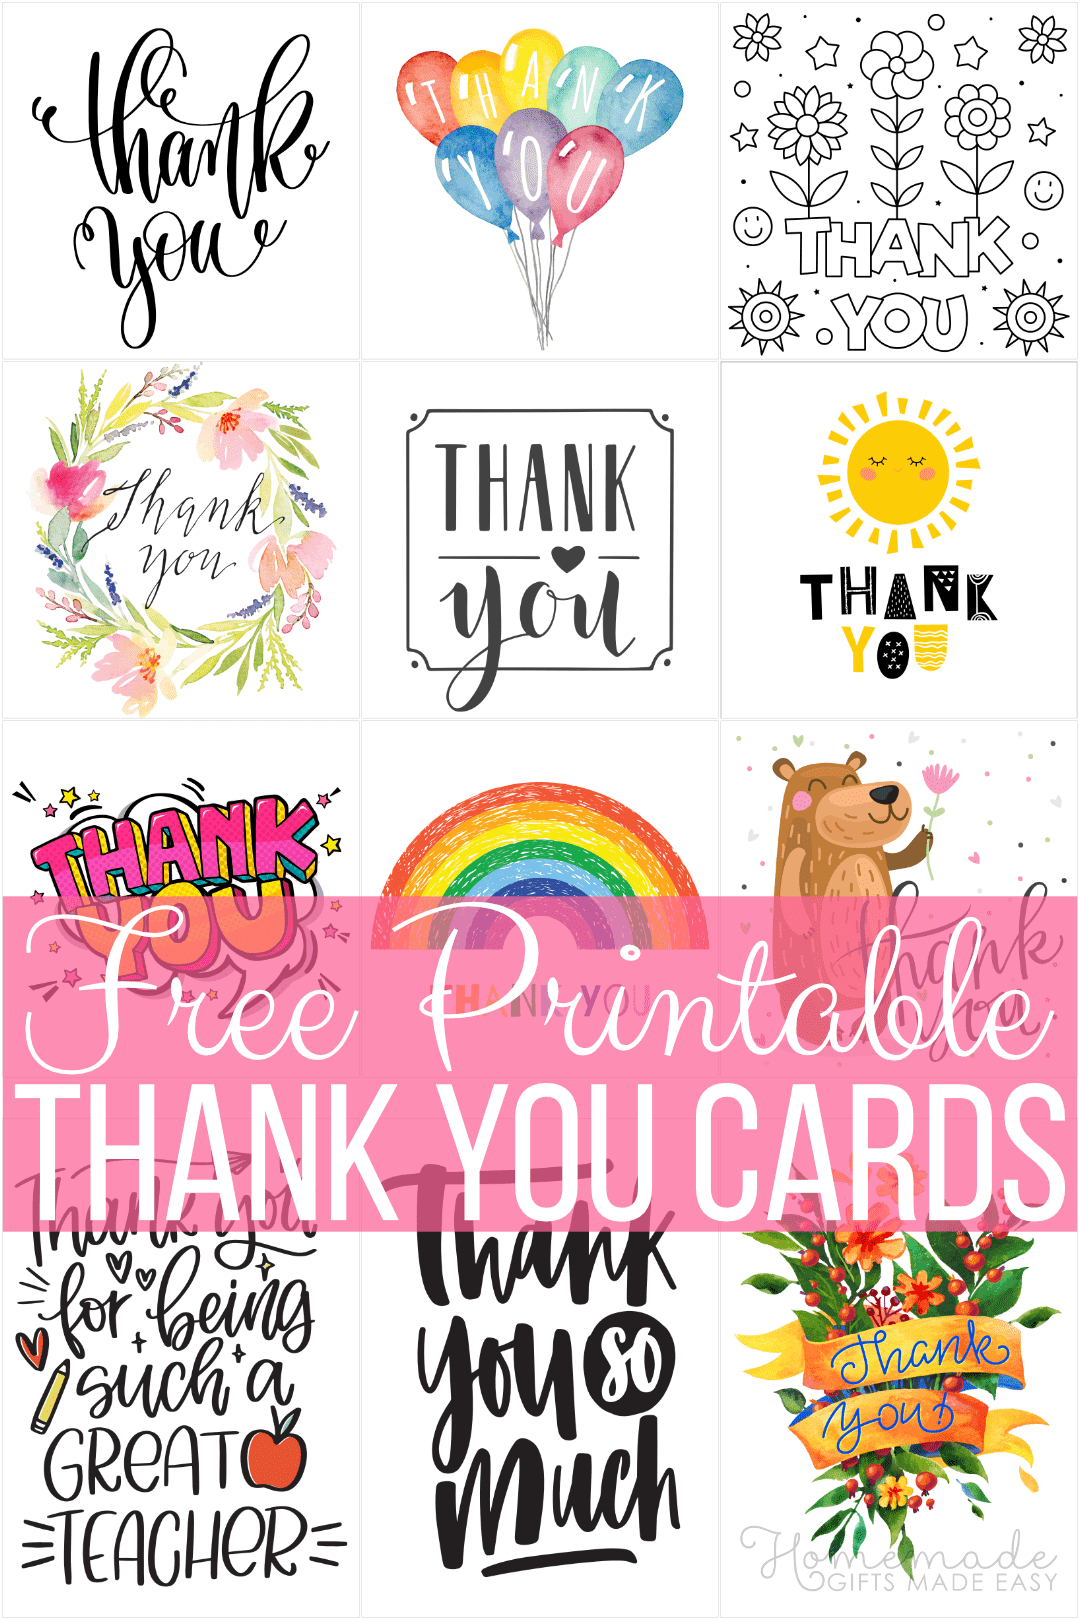 Free Printable Thank You Cards in Free Printable Thank You Cards